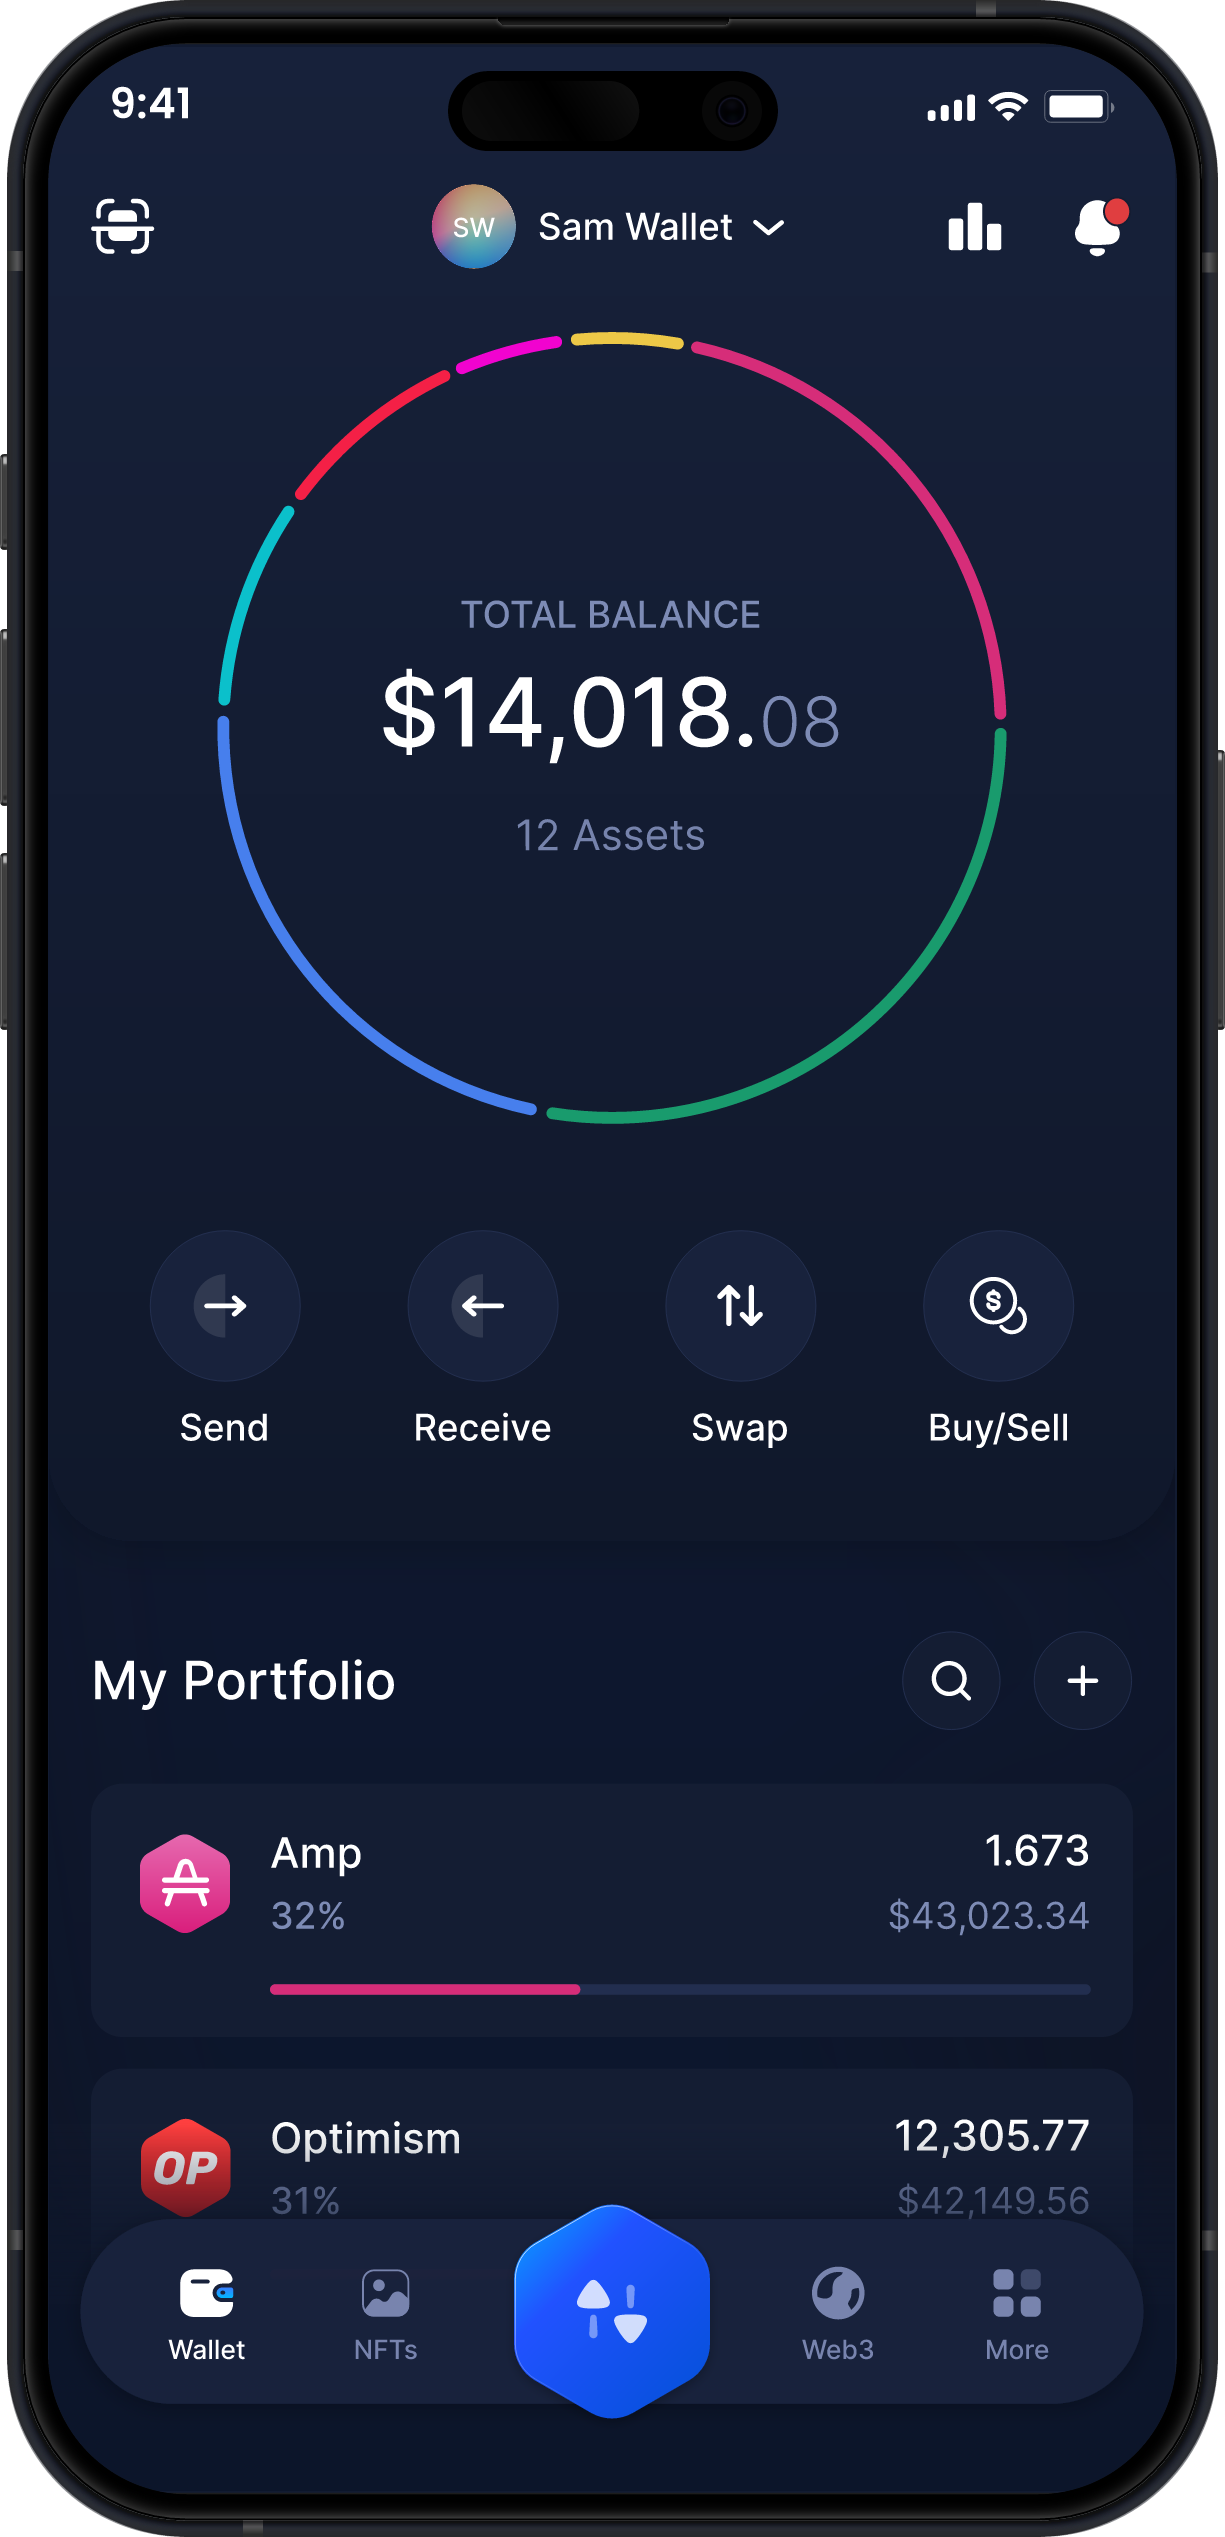 Infinity Mobile Amp Wallet - Dashboard AMP